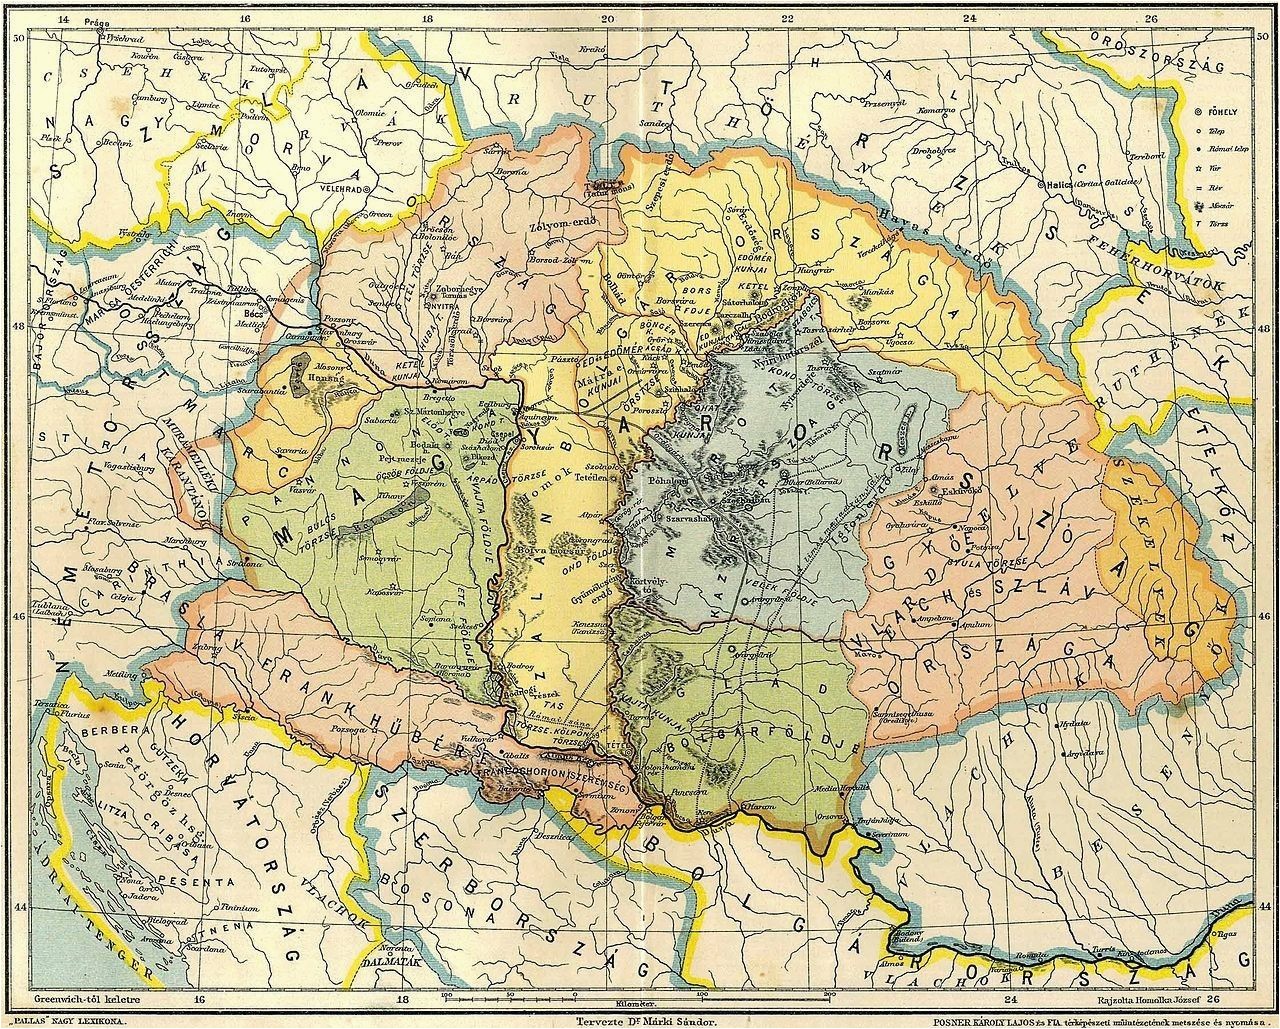 Hungary On Europe Map Map Of Central Europe In the 9th Century before Arrival Of